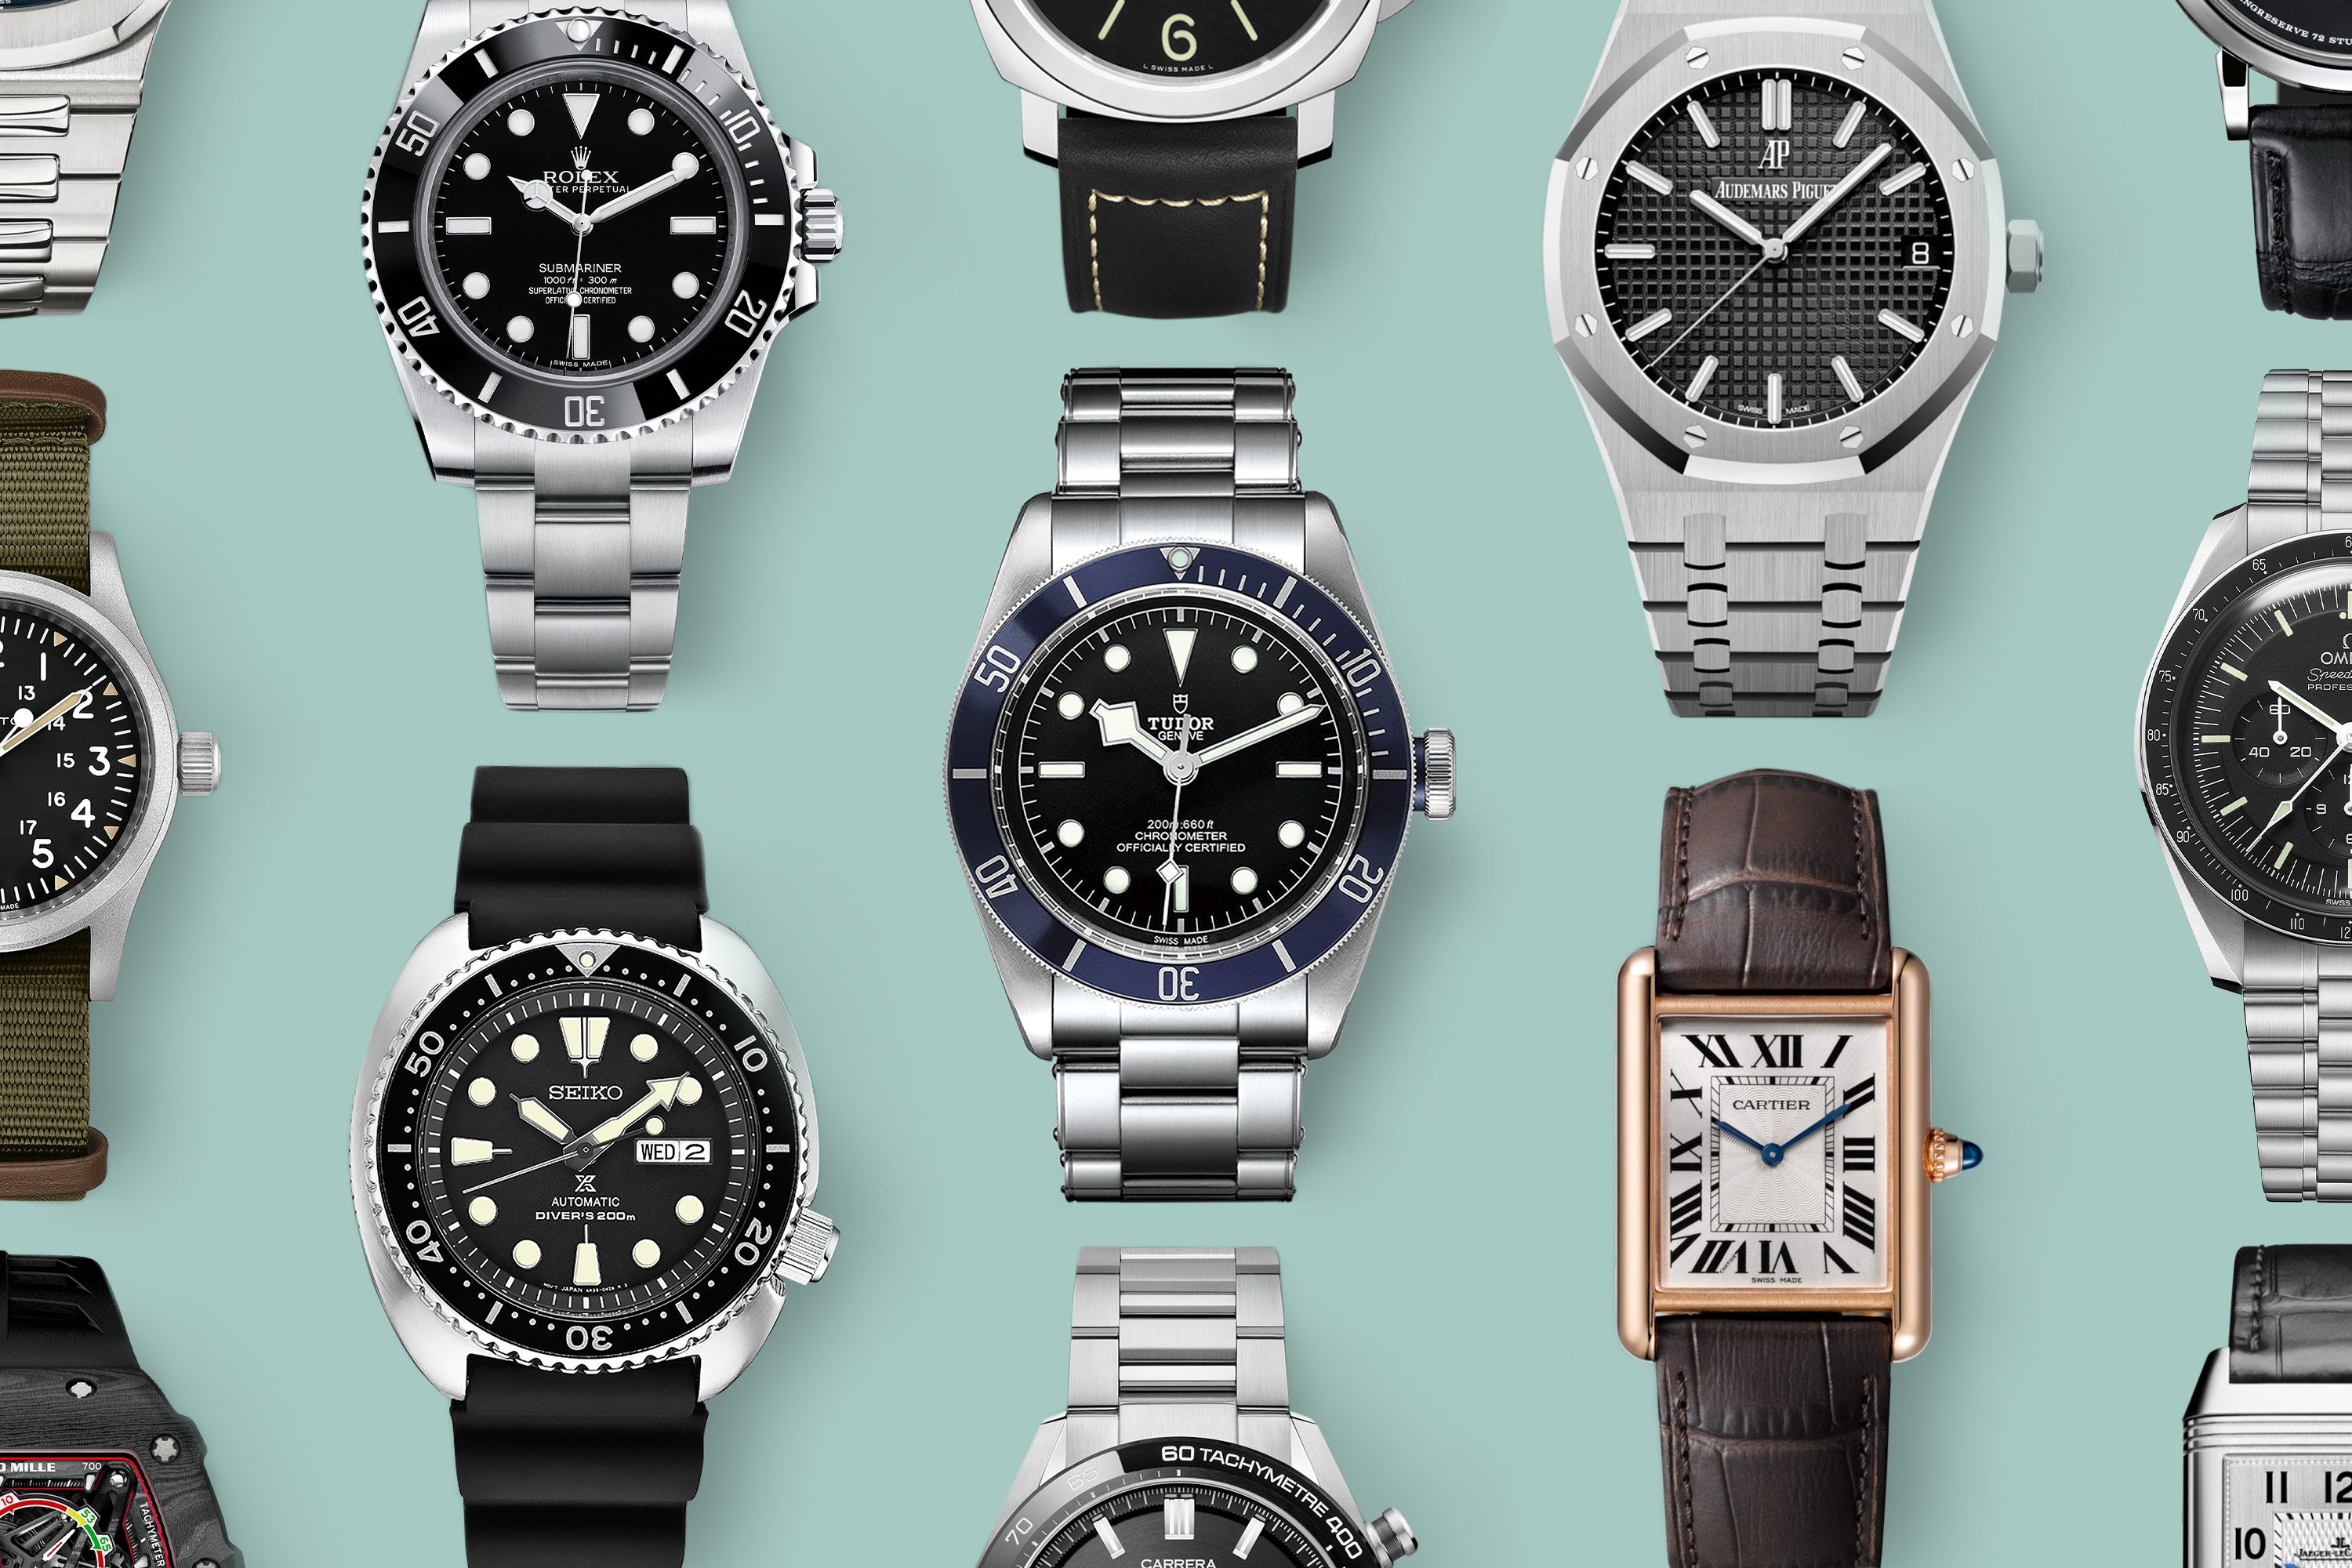 schouder behuizing plafond The Top 20 Watch Brands to Know